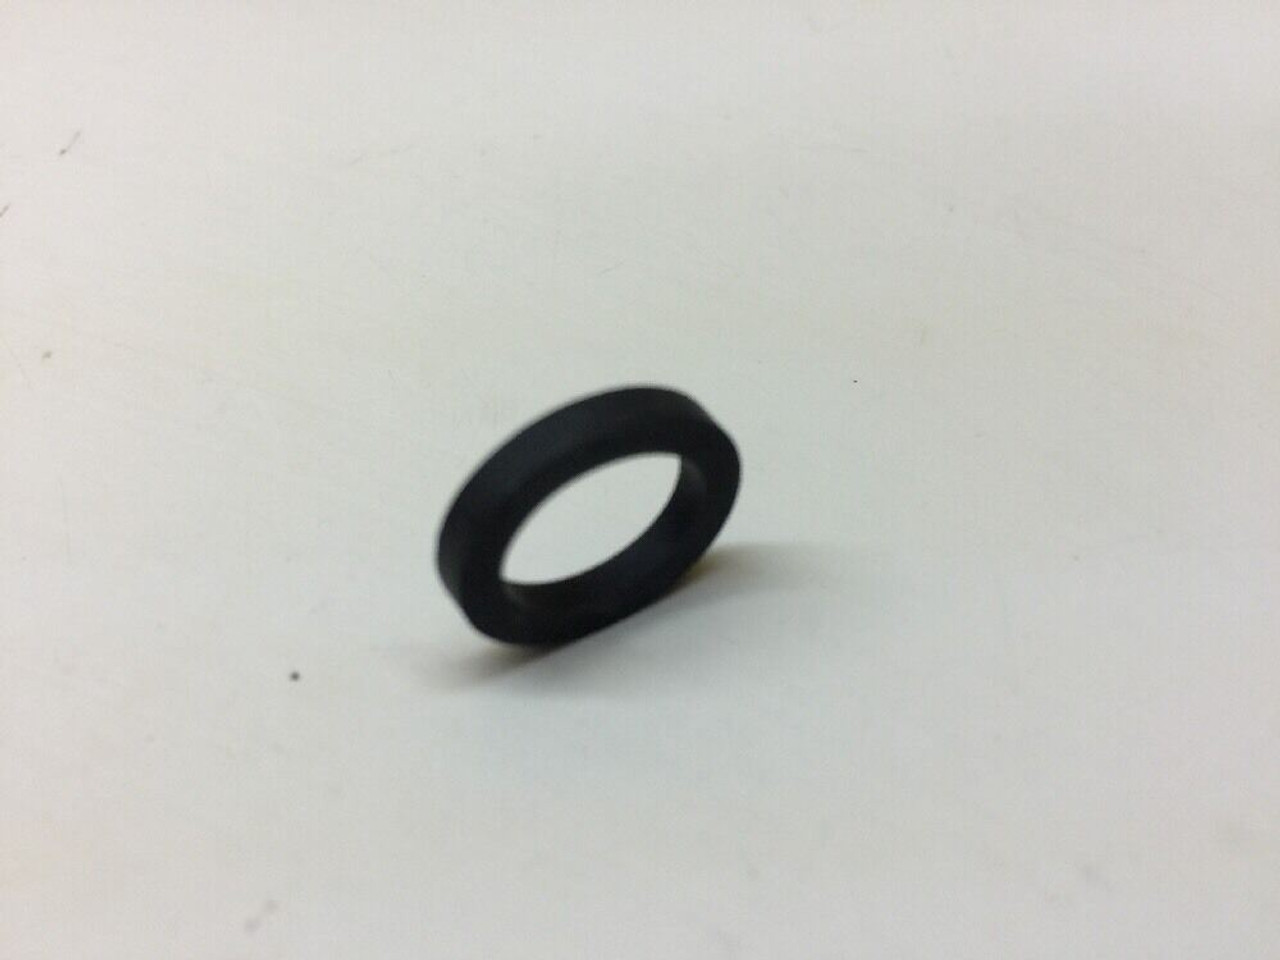 Flat Washer 01585 P & S Products Black Rubber Aircraft Lot of 50